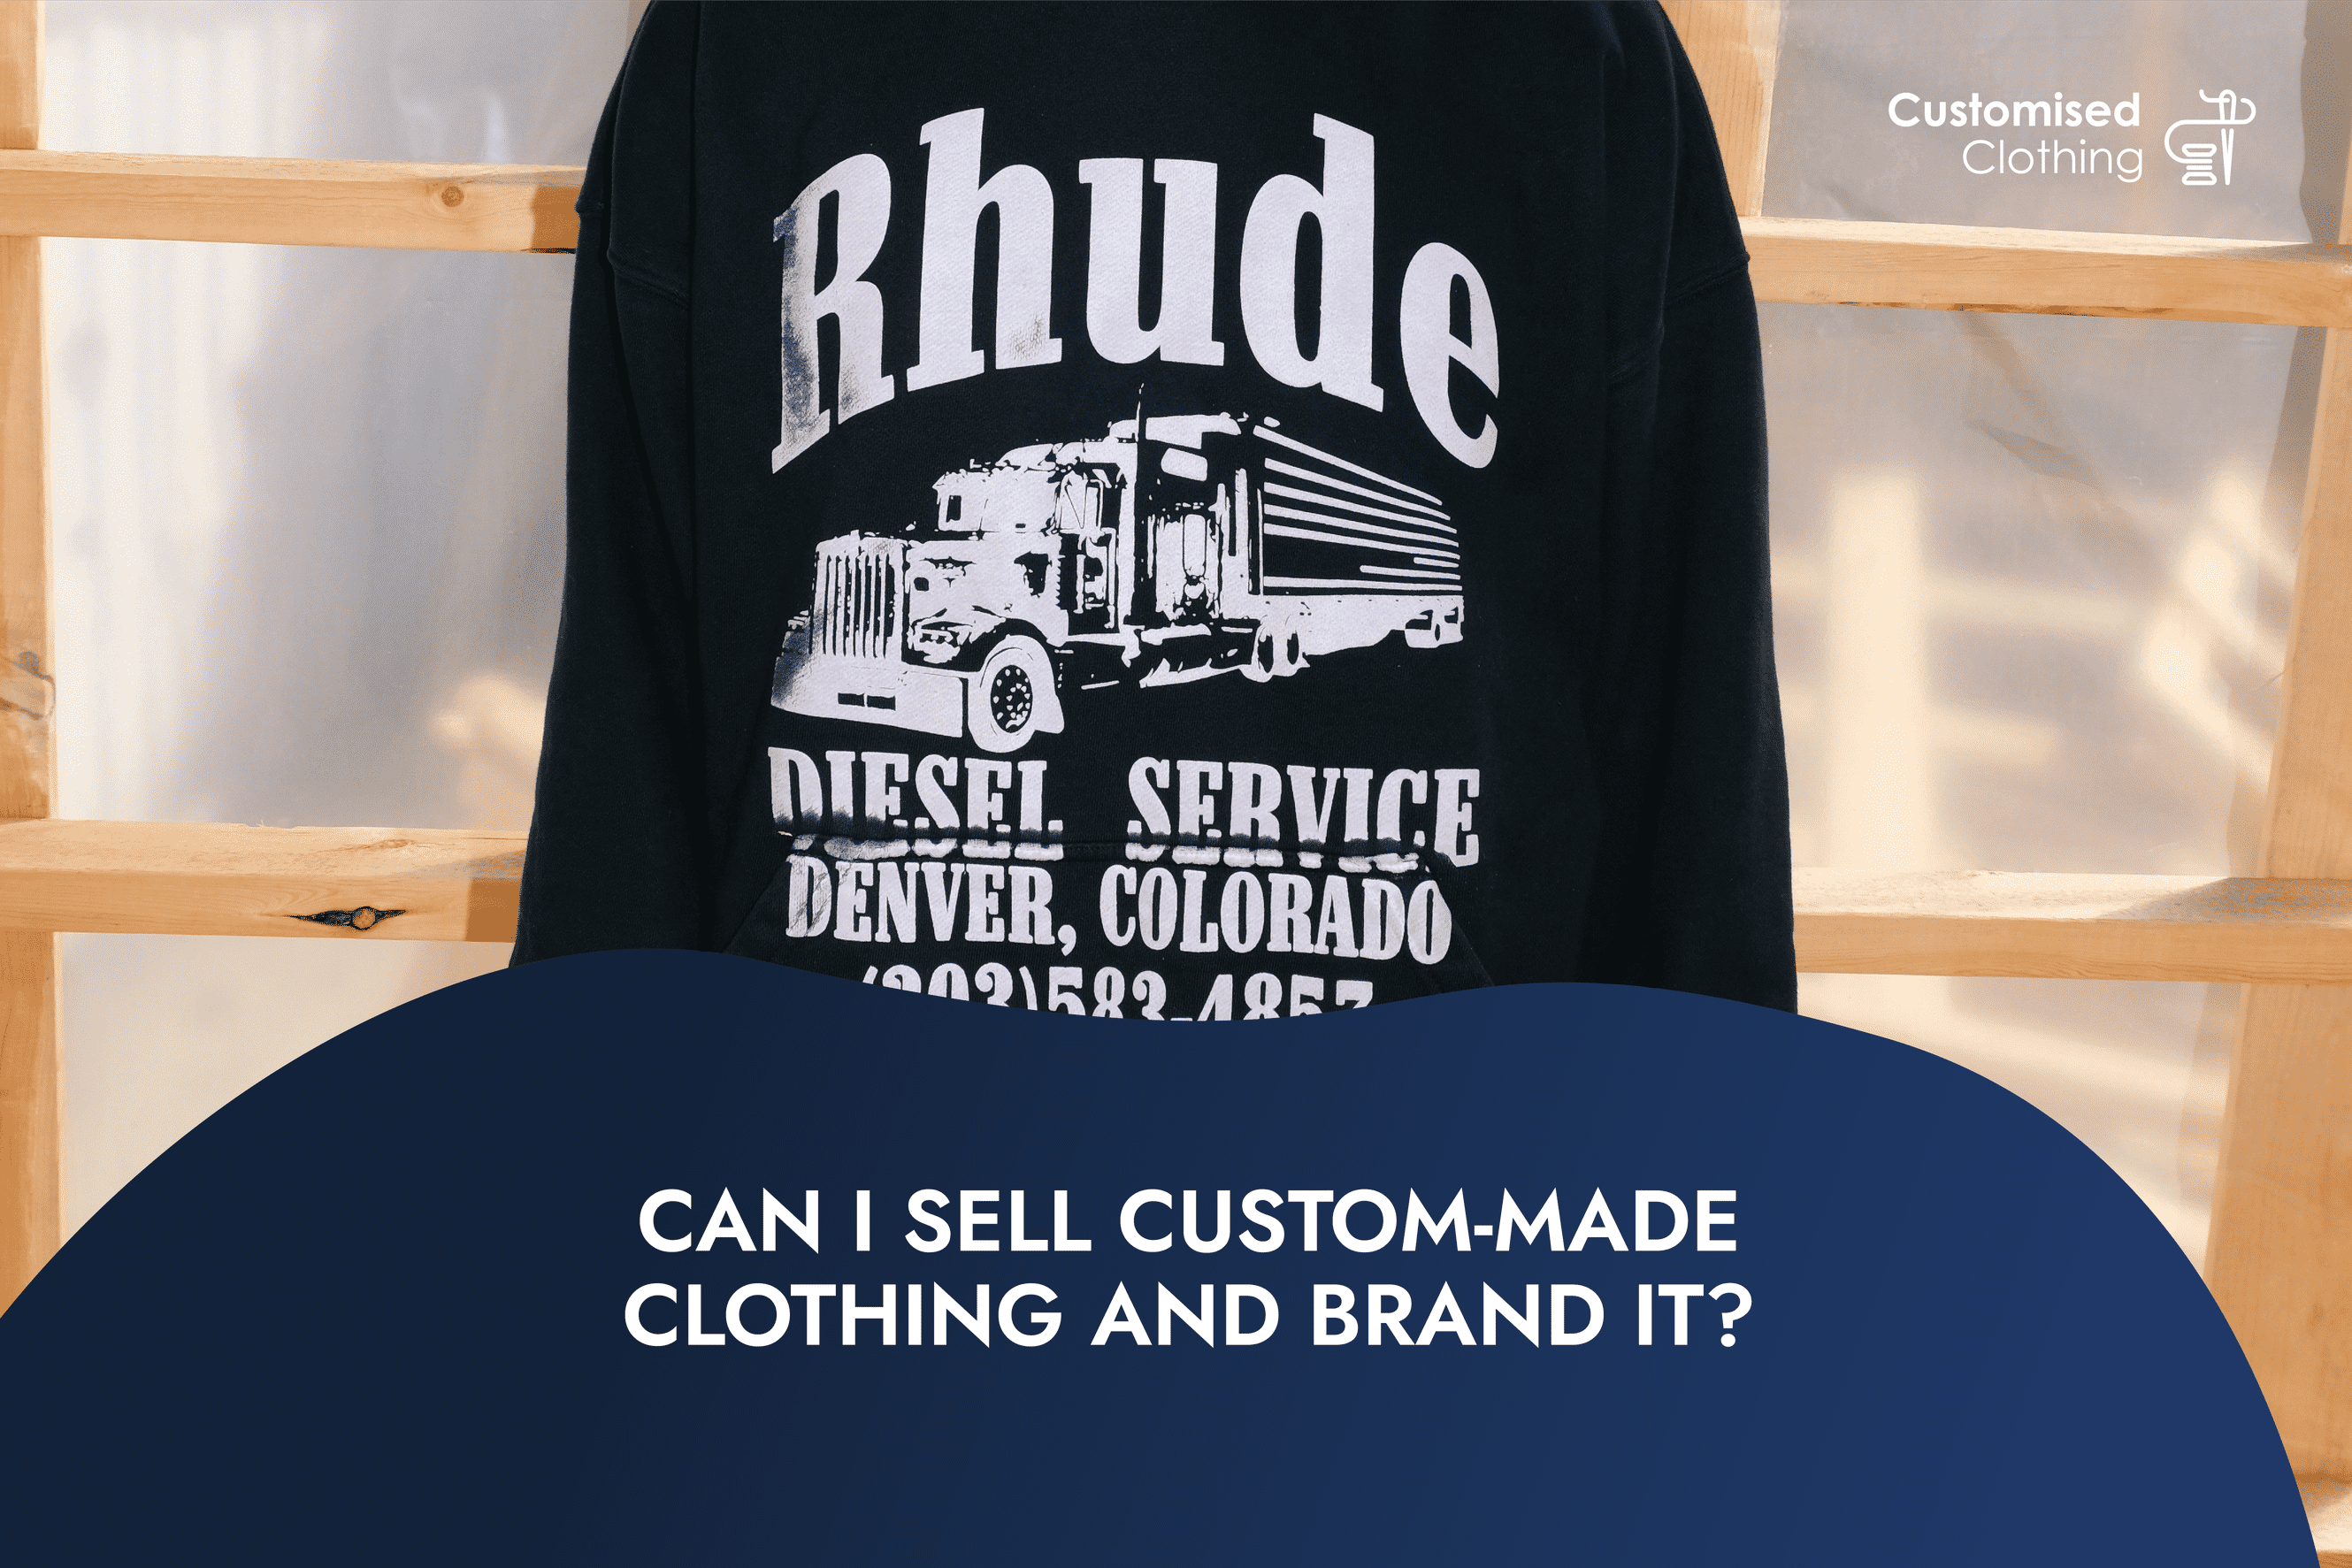 Can I sell custom-made clothing and brand it?